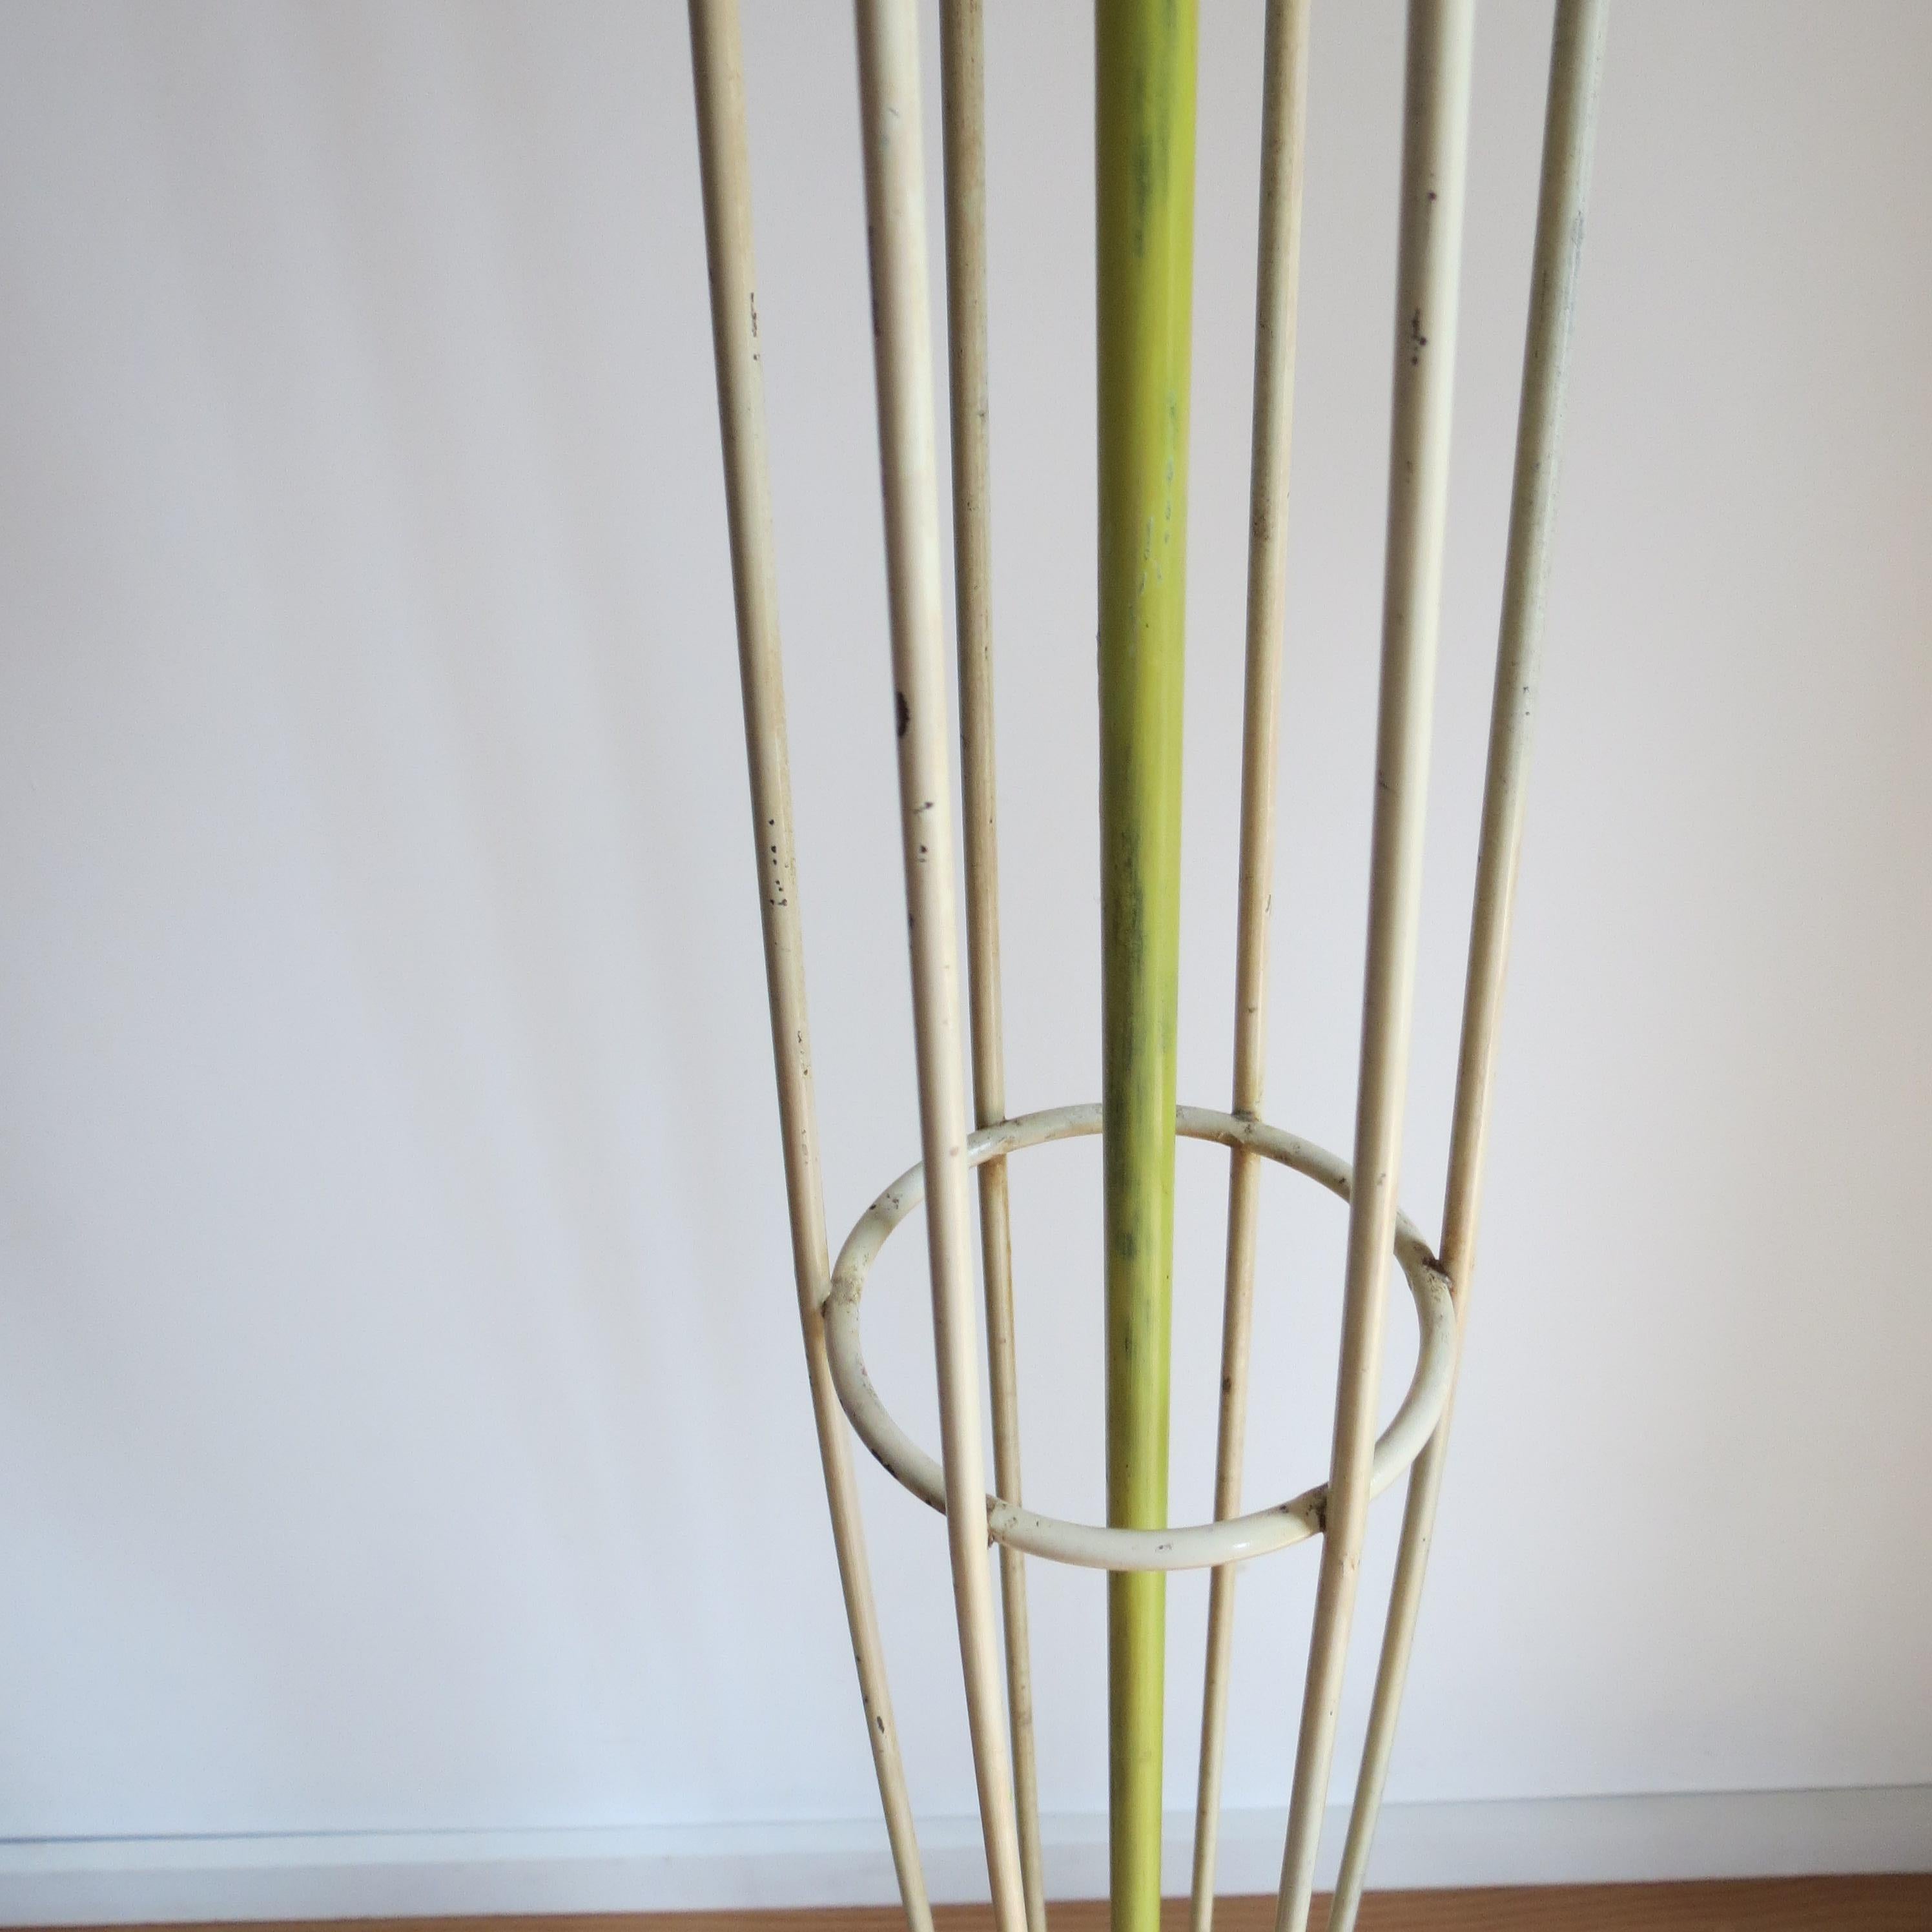 A wonderful and rare Festival of Britain Skylon floor lamp, dates from 1950s
The lamp is exact copy of the shape of the Skylon. Made from painted metal rod with wooden ball feet.
Retains the original paint, which shows signs of loss and